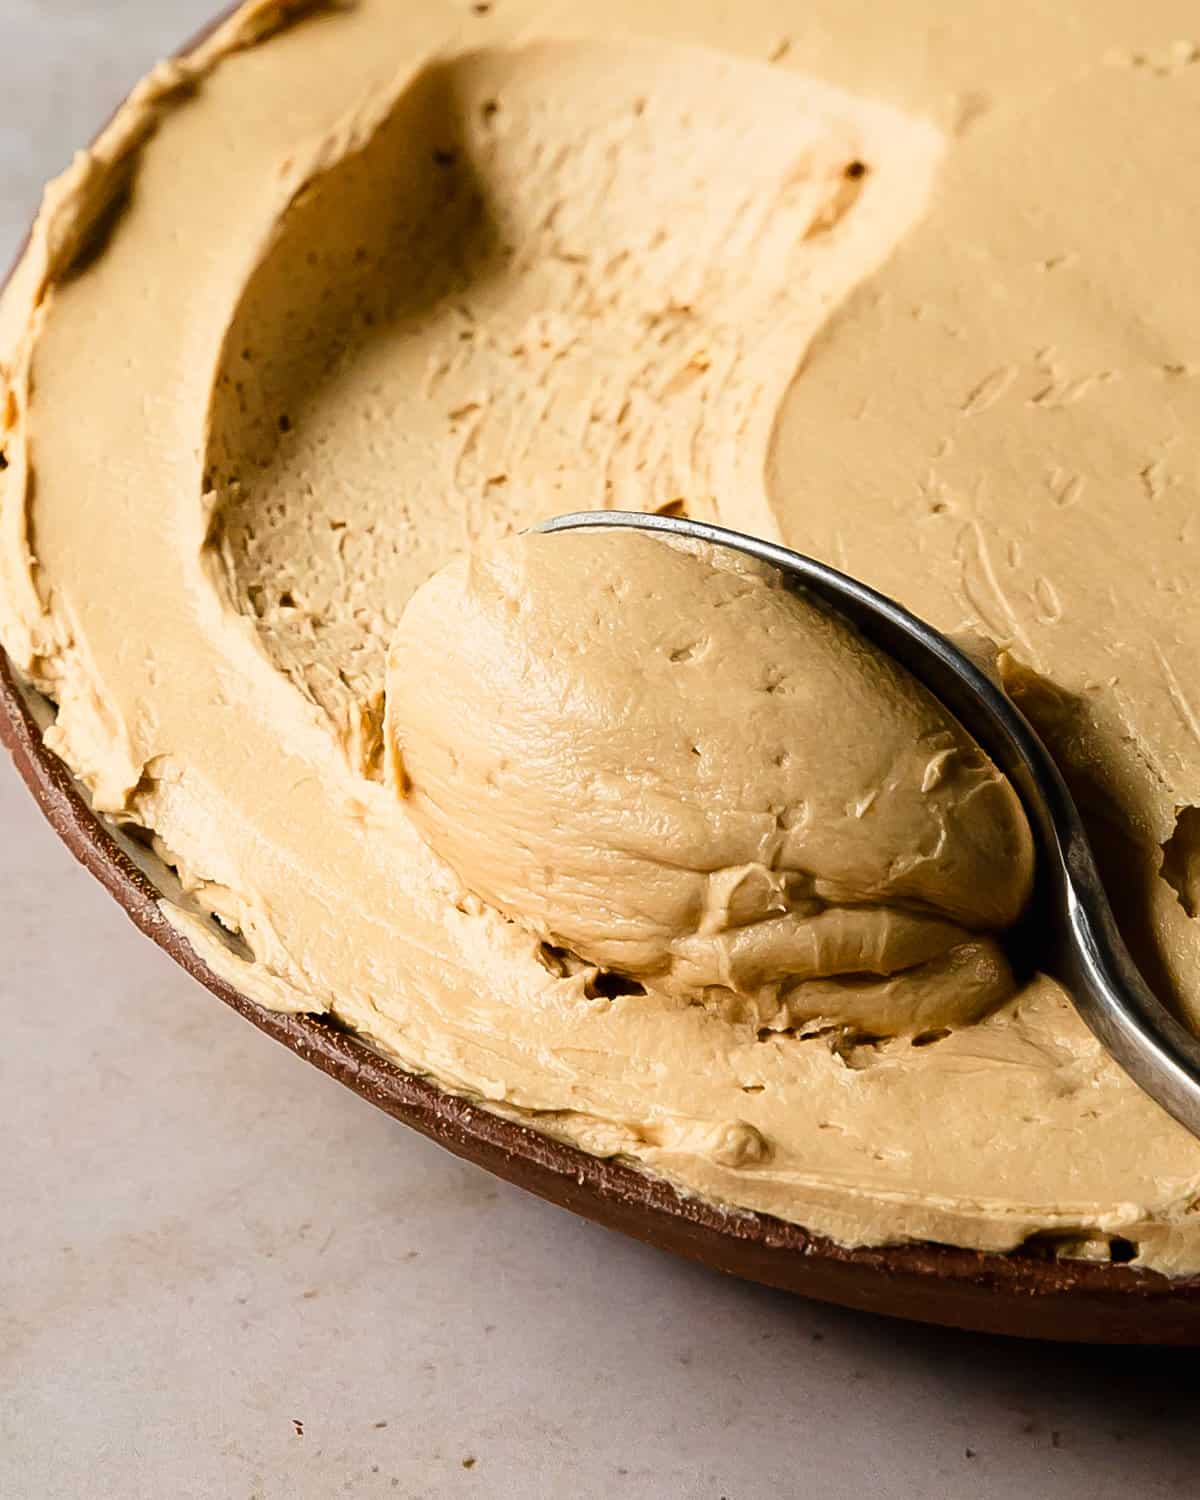 Coffee buttercream is a rich, sweet and creamy coffee flavored frosting that’s perfect for cakes, cupcakes or just to enjoy by the spoonful. Make this easy coffee frosting in about 5 minutes or less using 5 simple ingredients